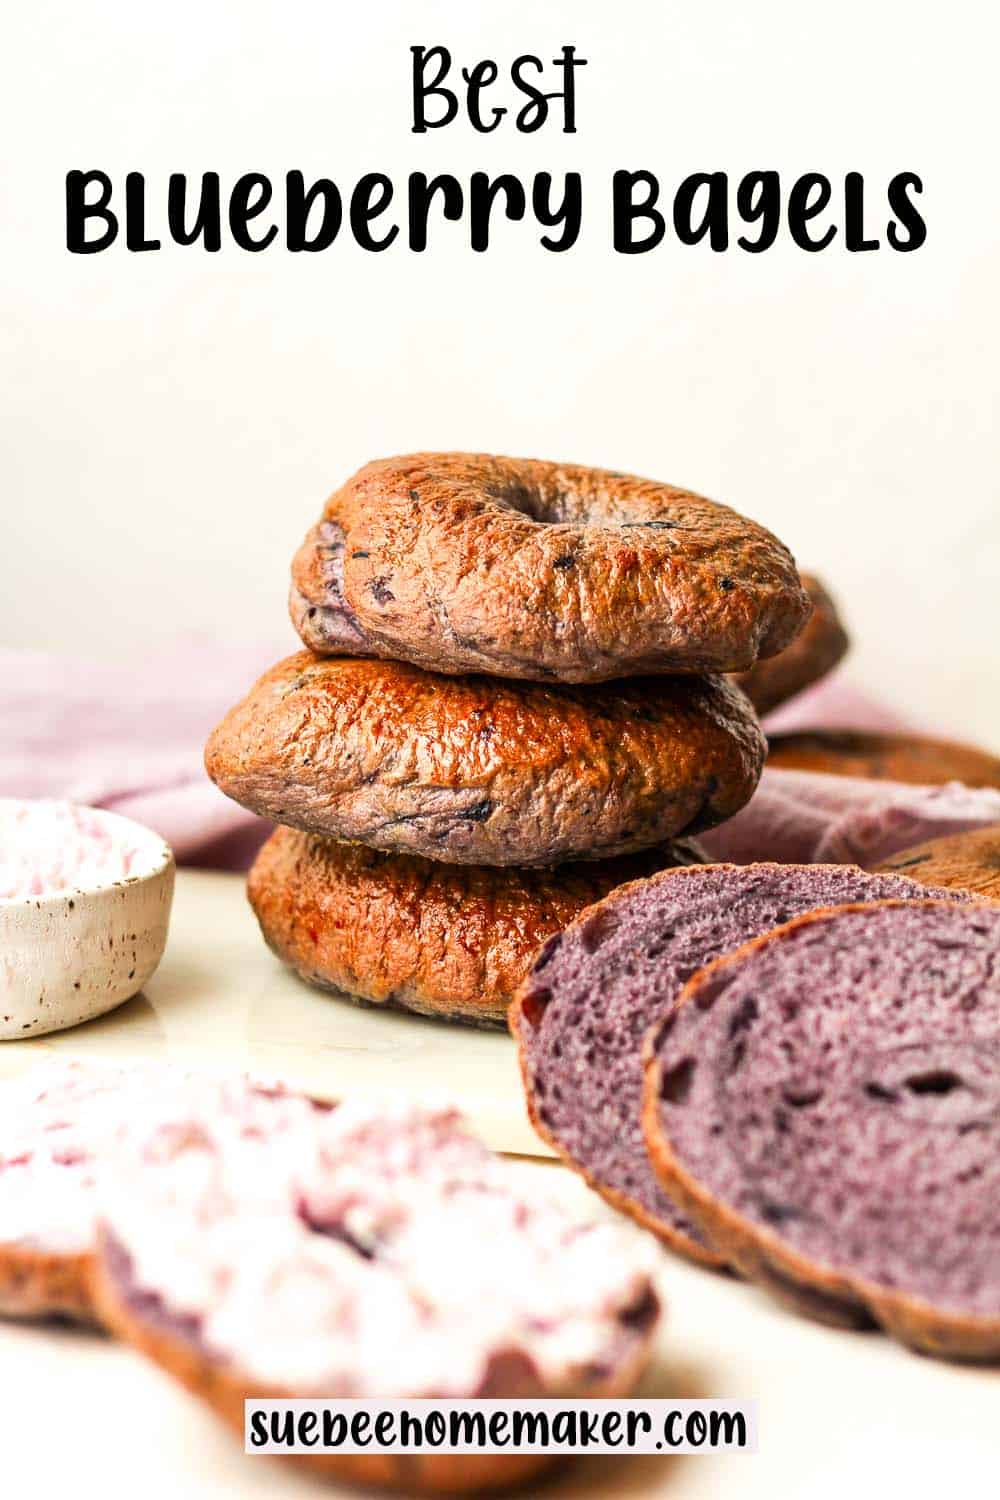 Three stacked blueberry bagels.